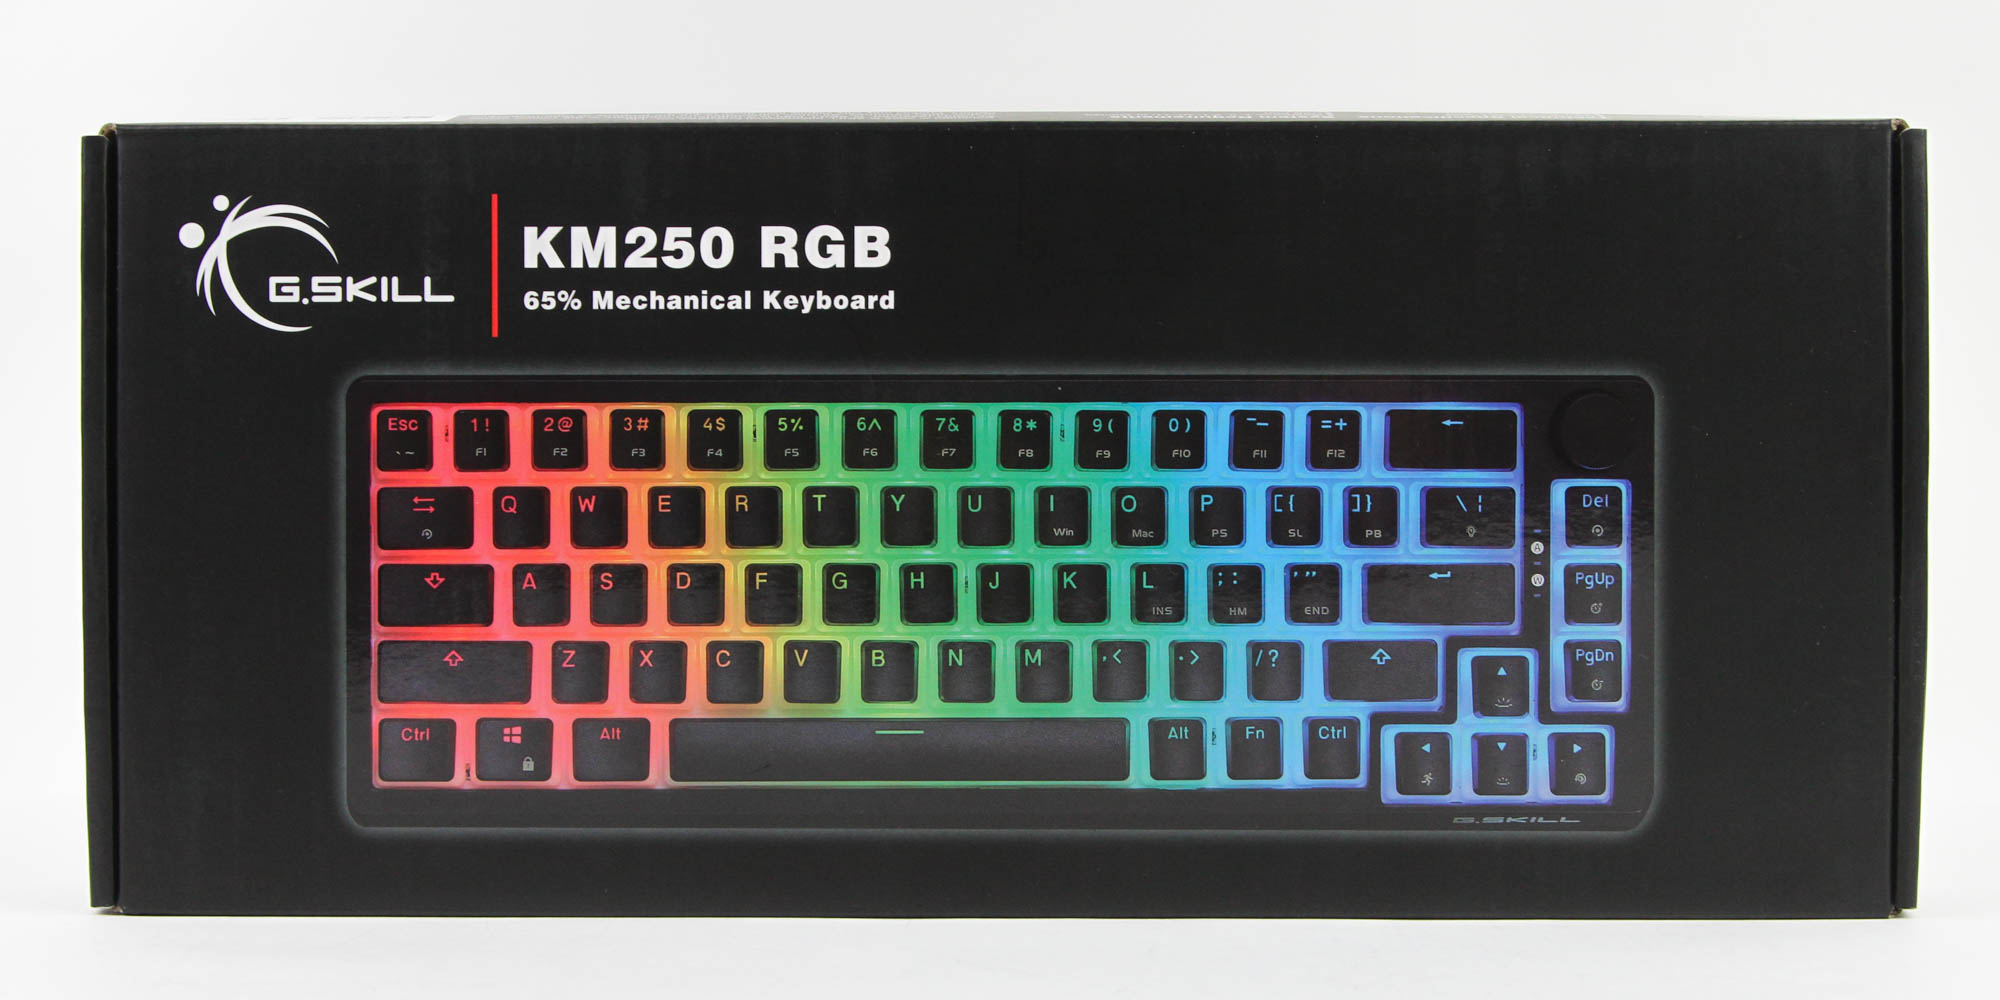 G.Skill KM250 RGB Mechanical Keyboard Review - Great Value! - Packaging &  Accessories